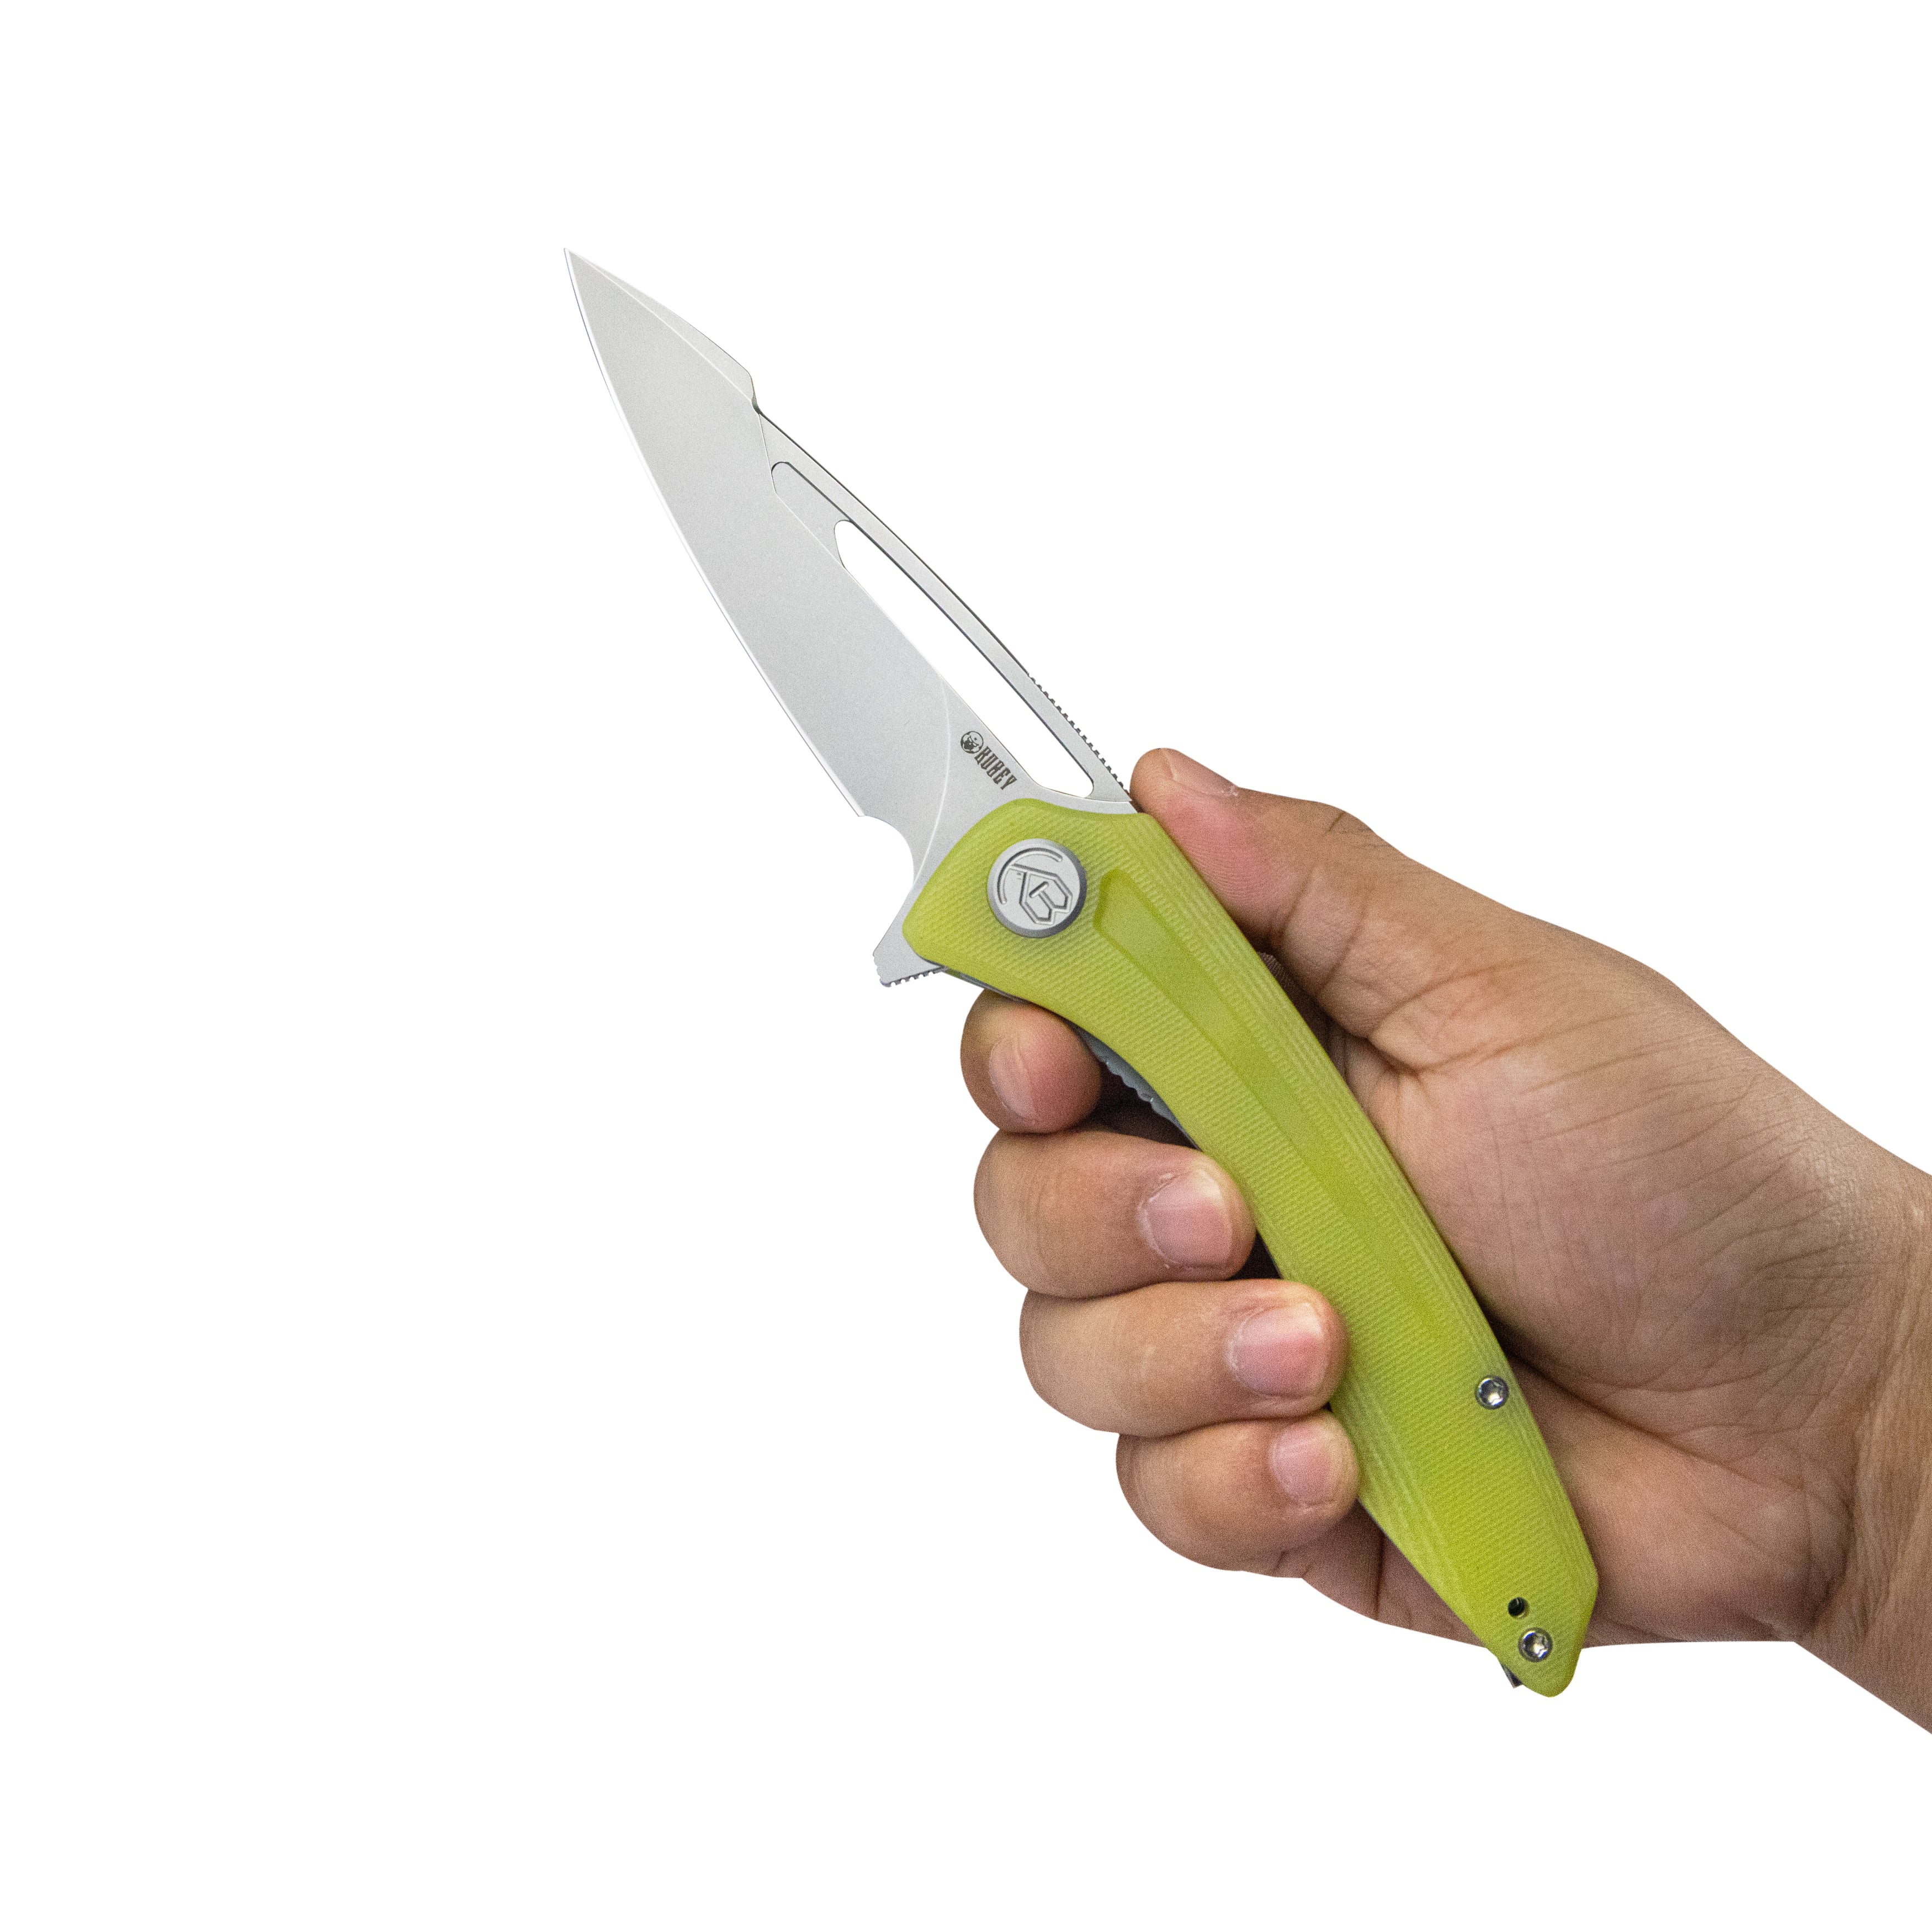 Merced Folding Knife 3.46" Beadblasted AUS-10 Blade With Durable Translucent Yellow G10 Handle Reliable Tactical Pocket Knife KU345H